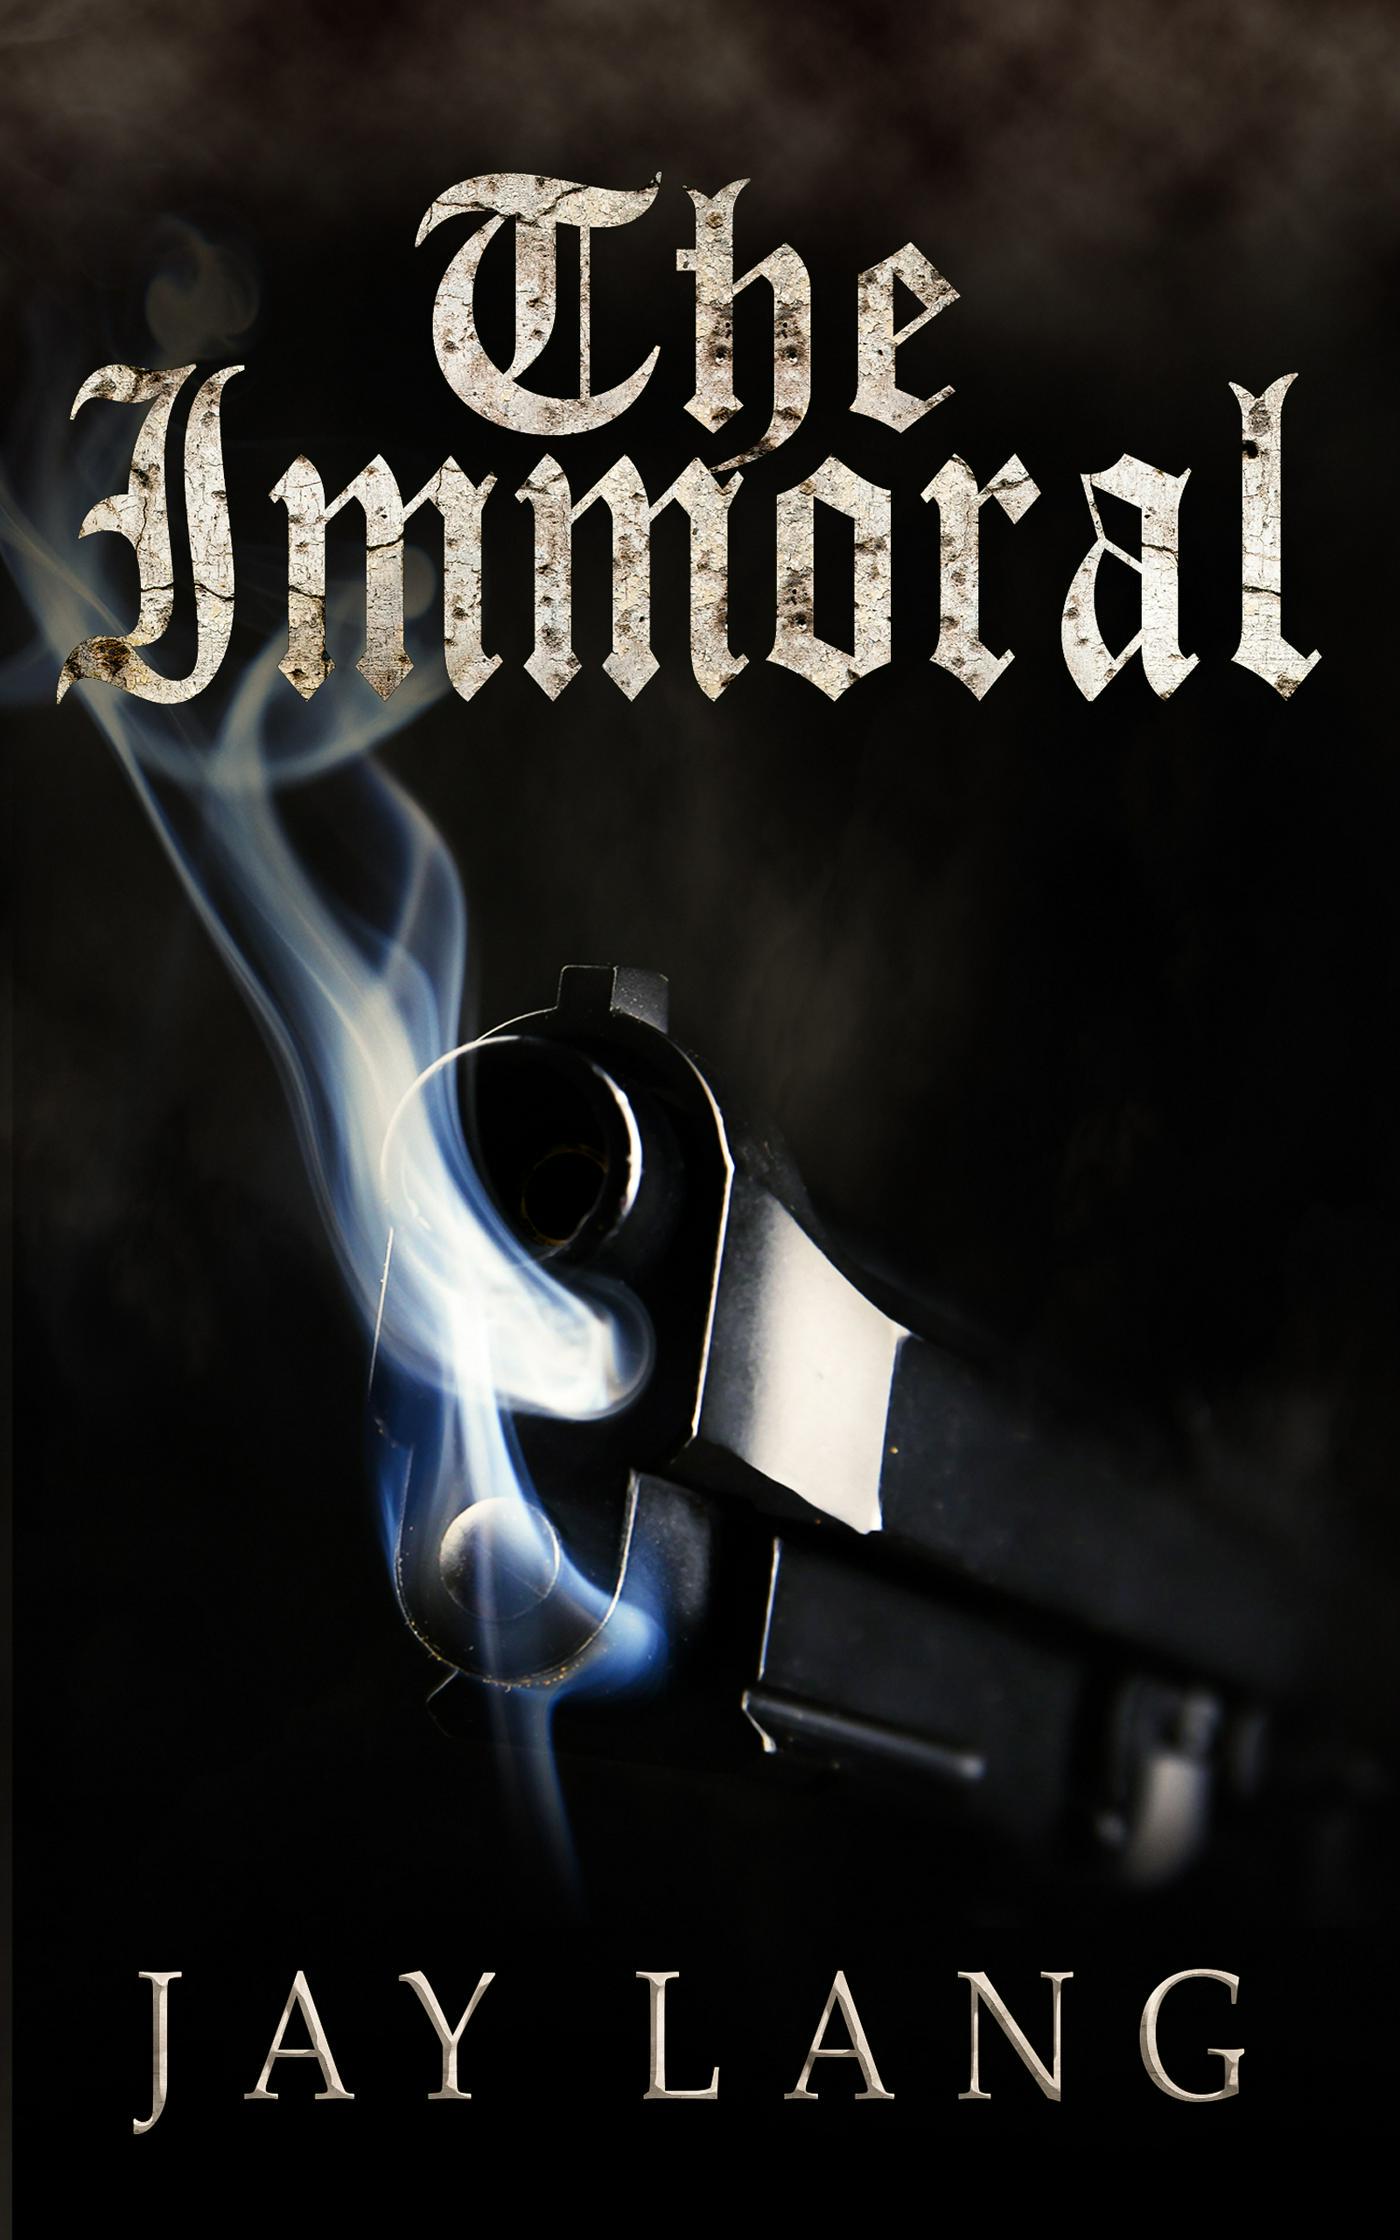 Jay Lang “The Immoral” book cover, image by Michelle Lee